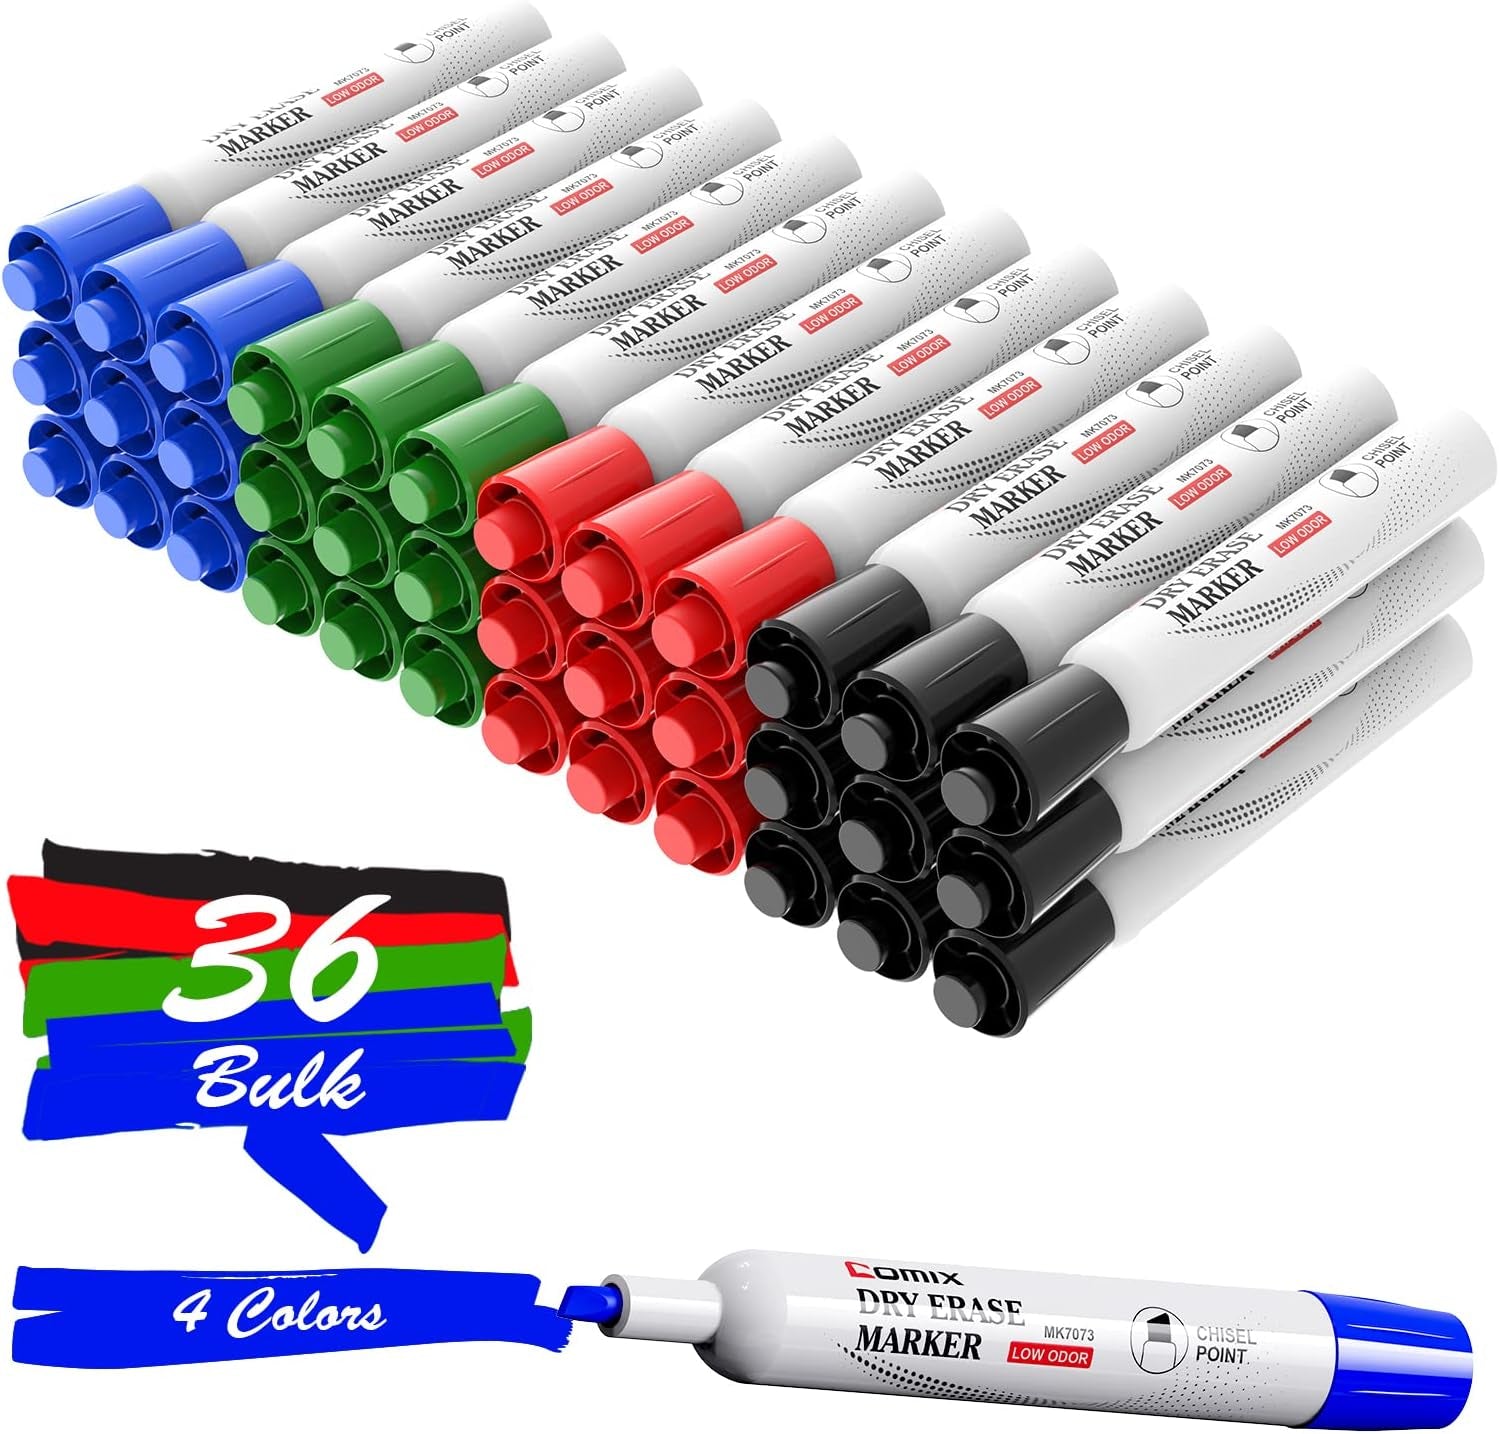 Dry Erase Markers, Chisel Tip White Board Markers, 36 Bulk 4 Assorted Colors Low Odor Markers for Teachers Office & School Supplies